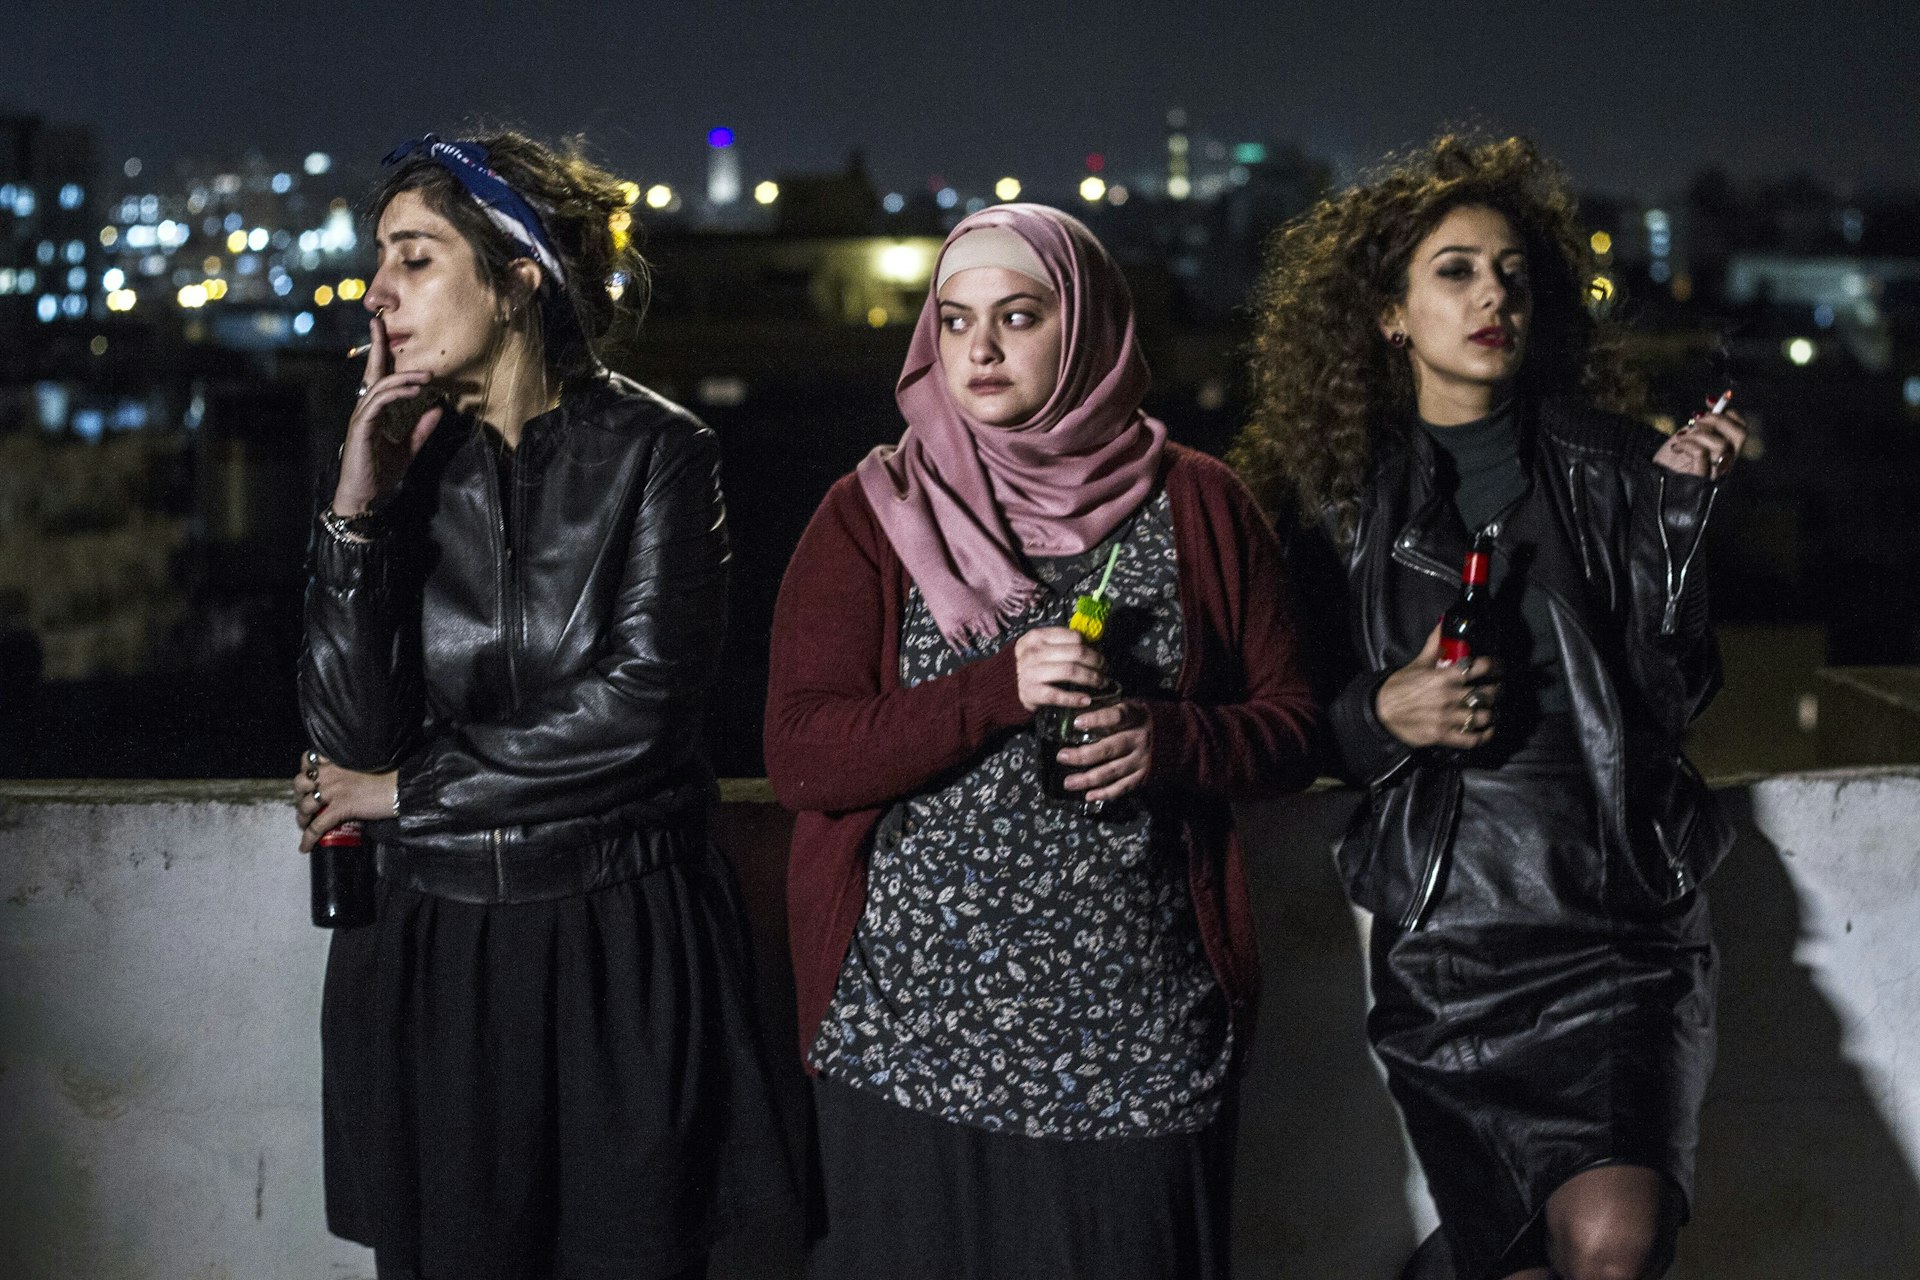 The Palestinian director who earned a fatwa for her first film